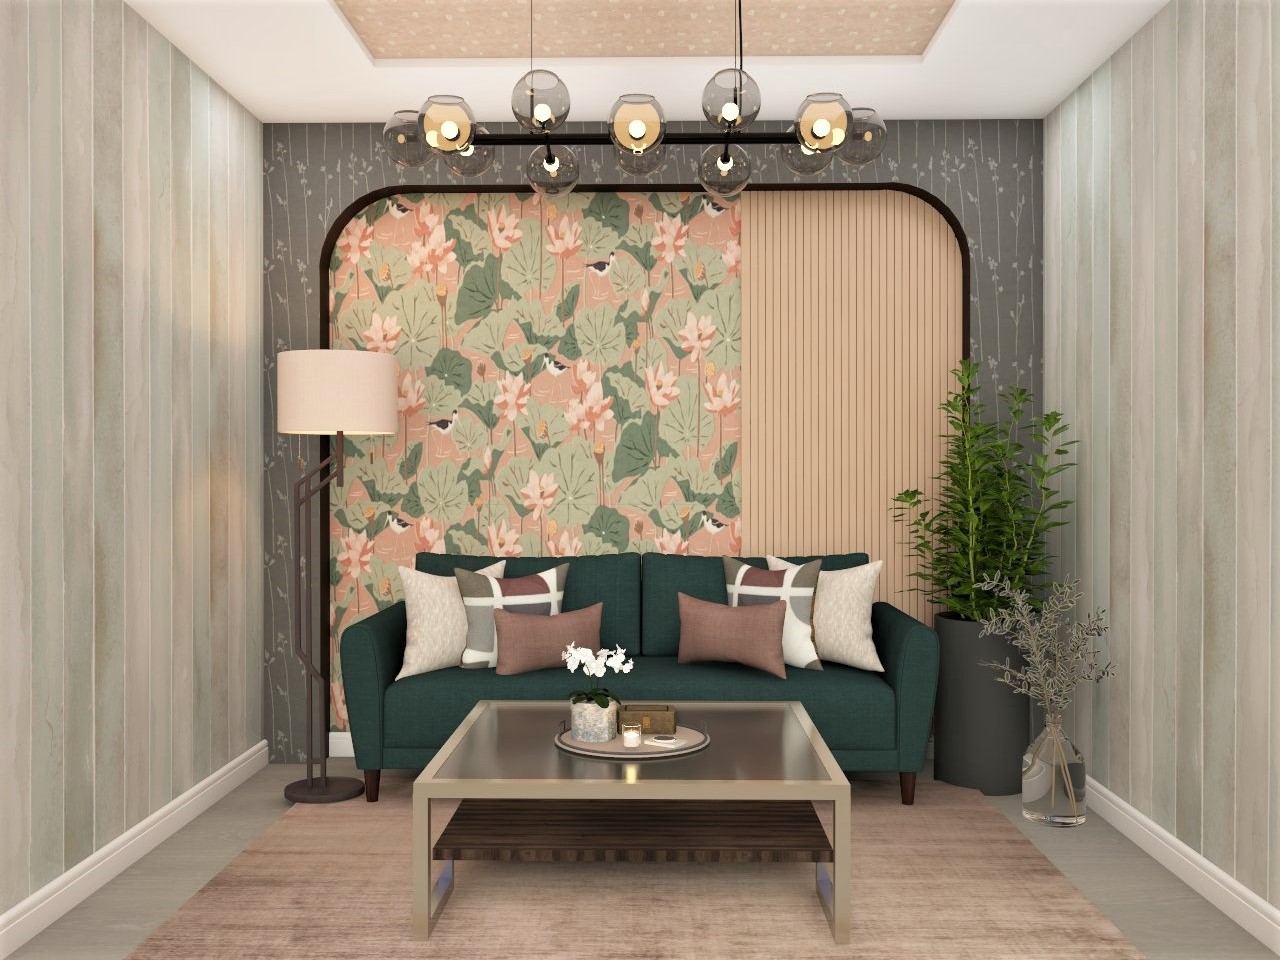 Living room design with green 3-seater sofa and floral wallpaper-Beautiful Homes